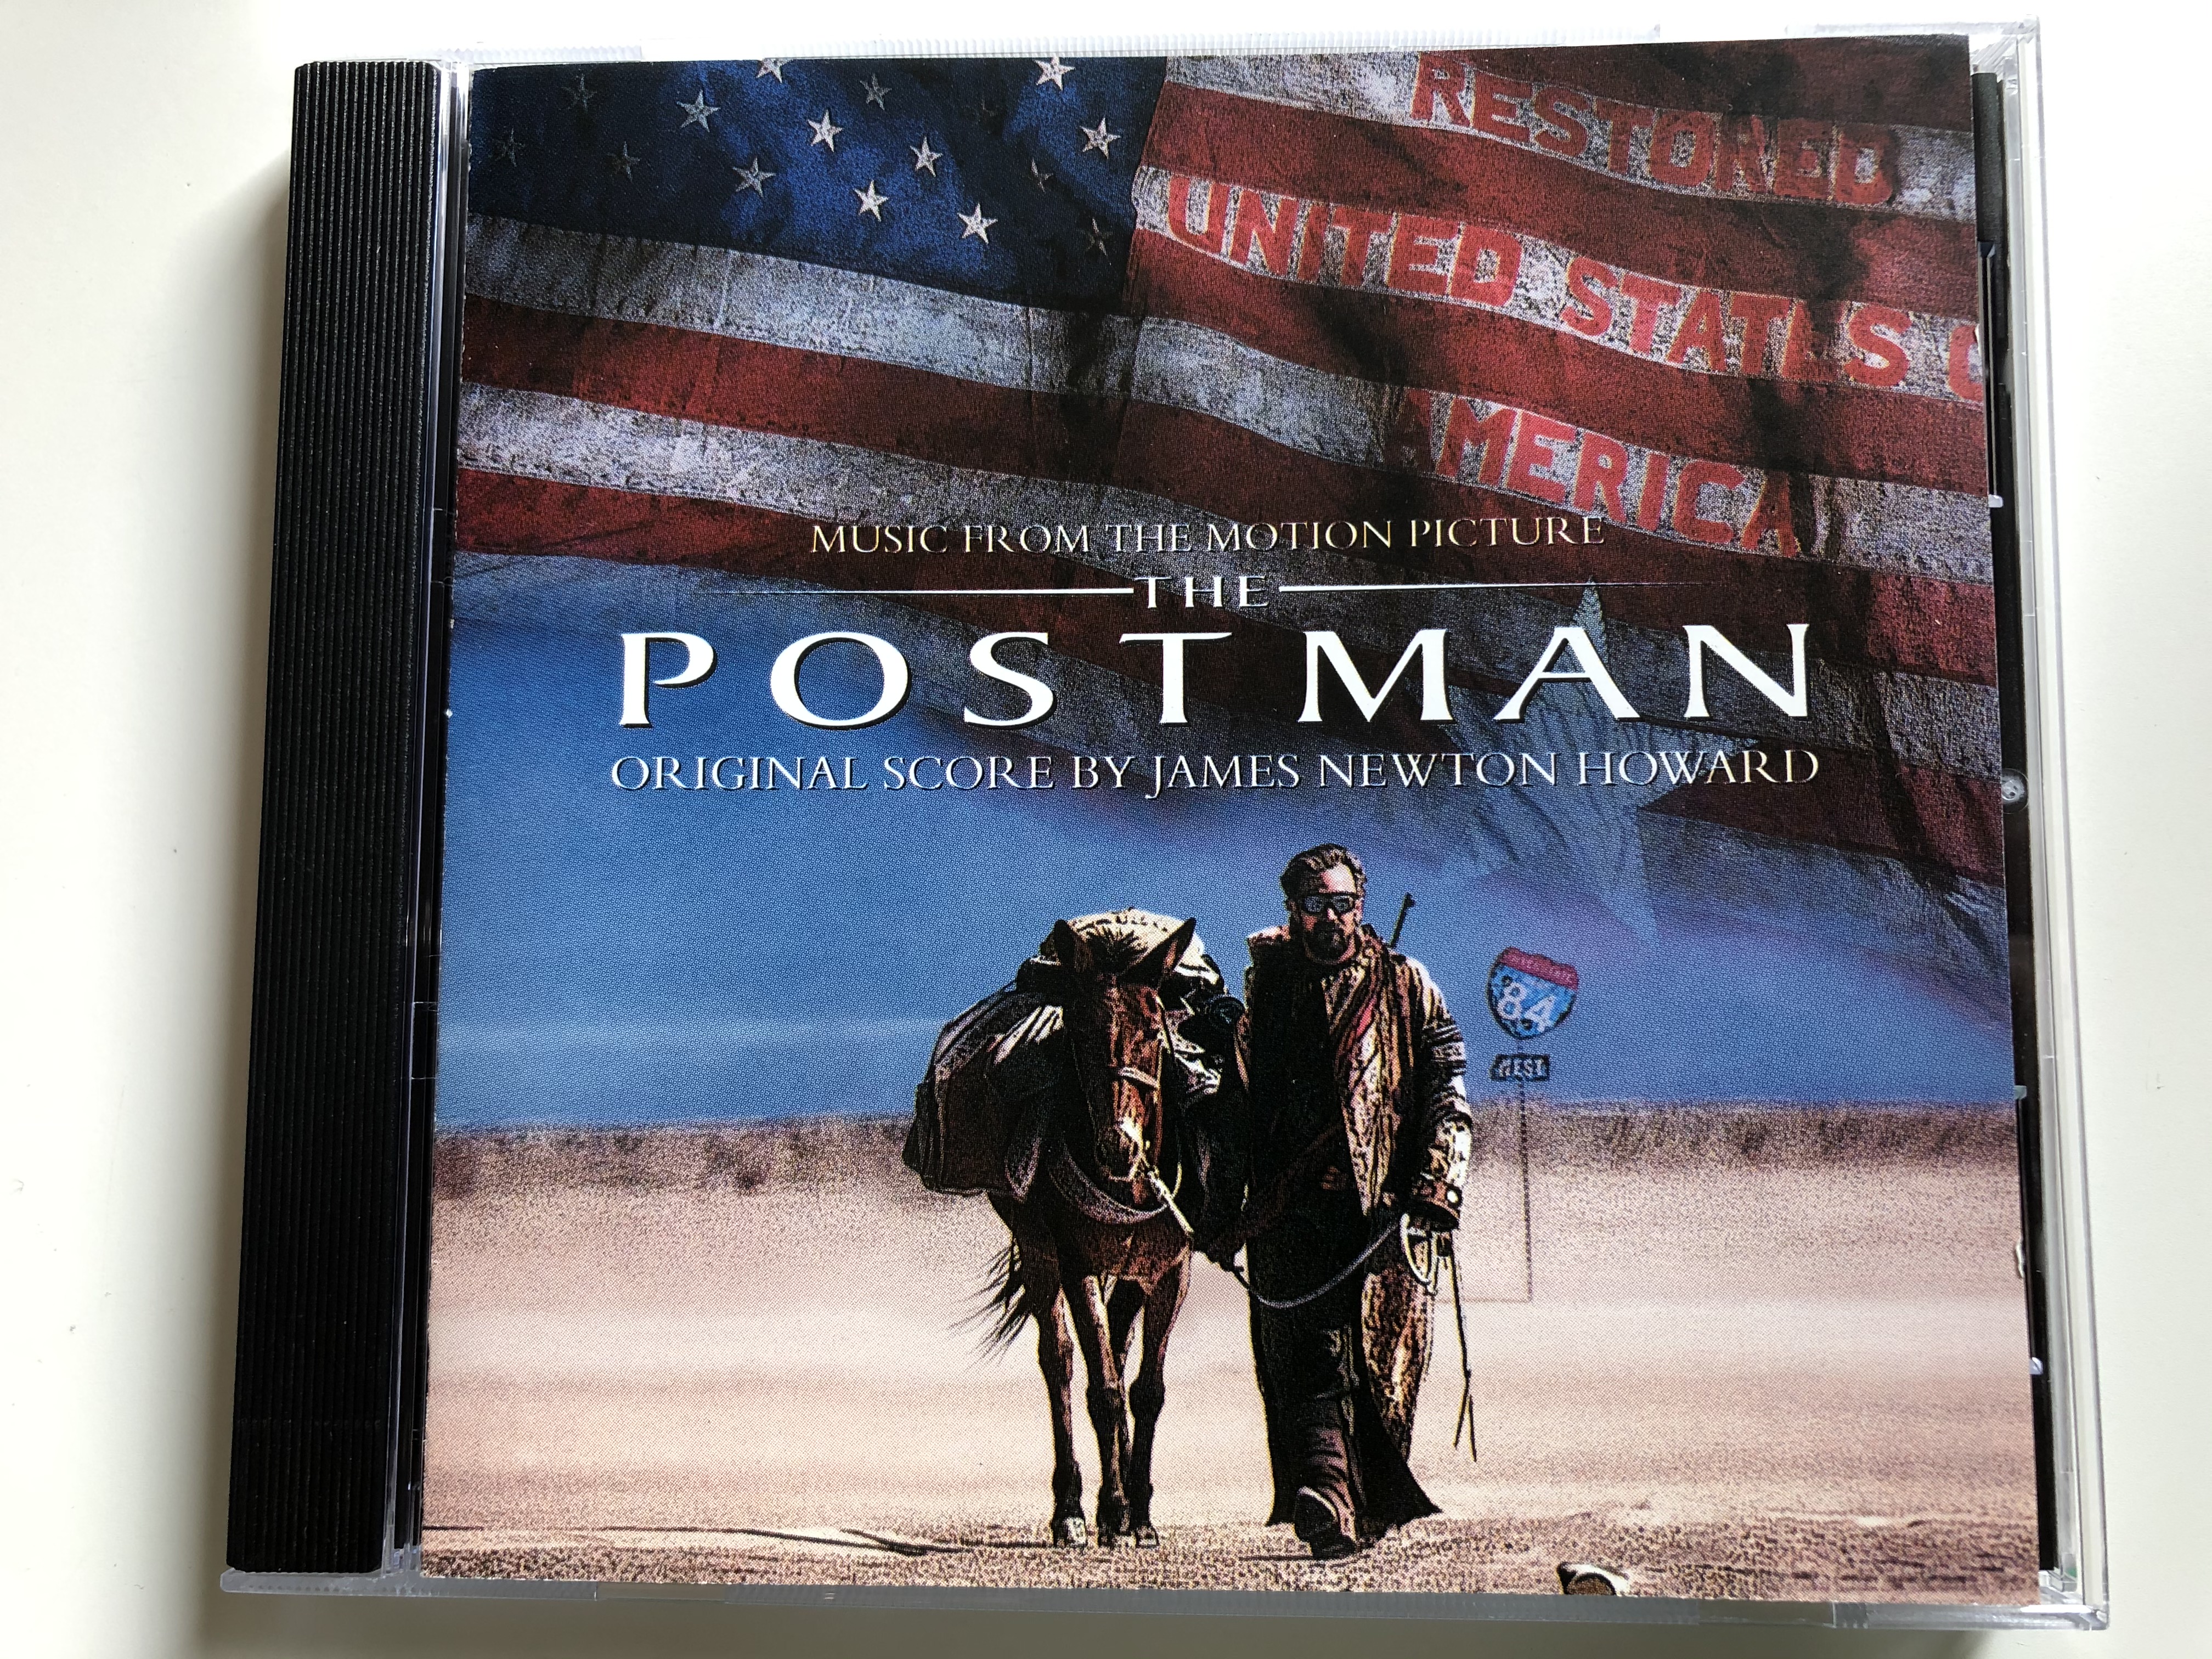 music-from-the-motion-picture-the-postman-original-score-by-james-newton-howard-warner-bros.-records-audio-cd-1997-9362-46842-2-1-.jpg